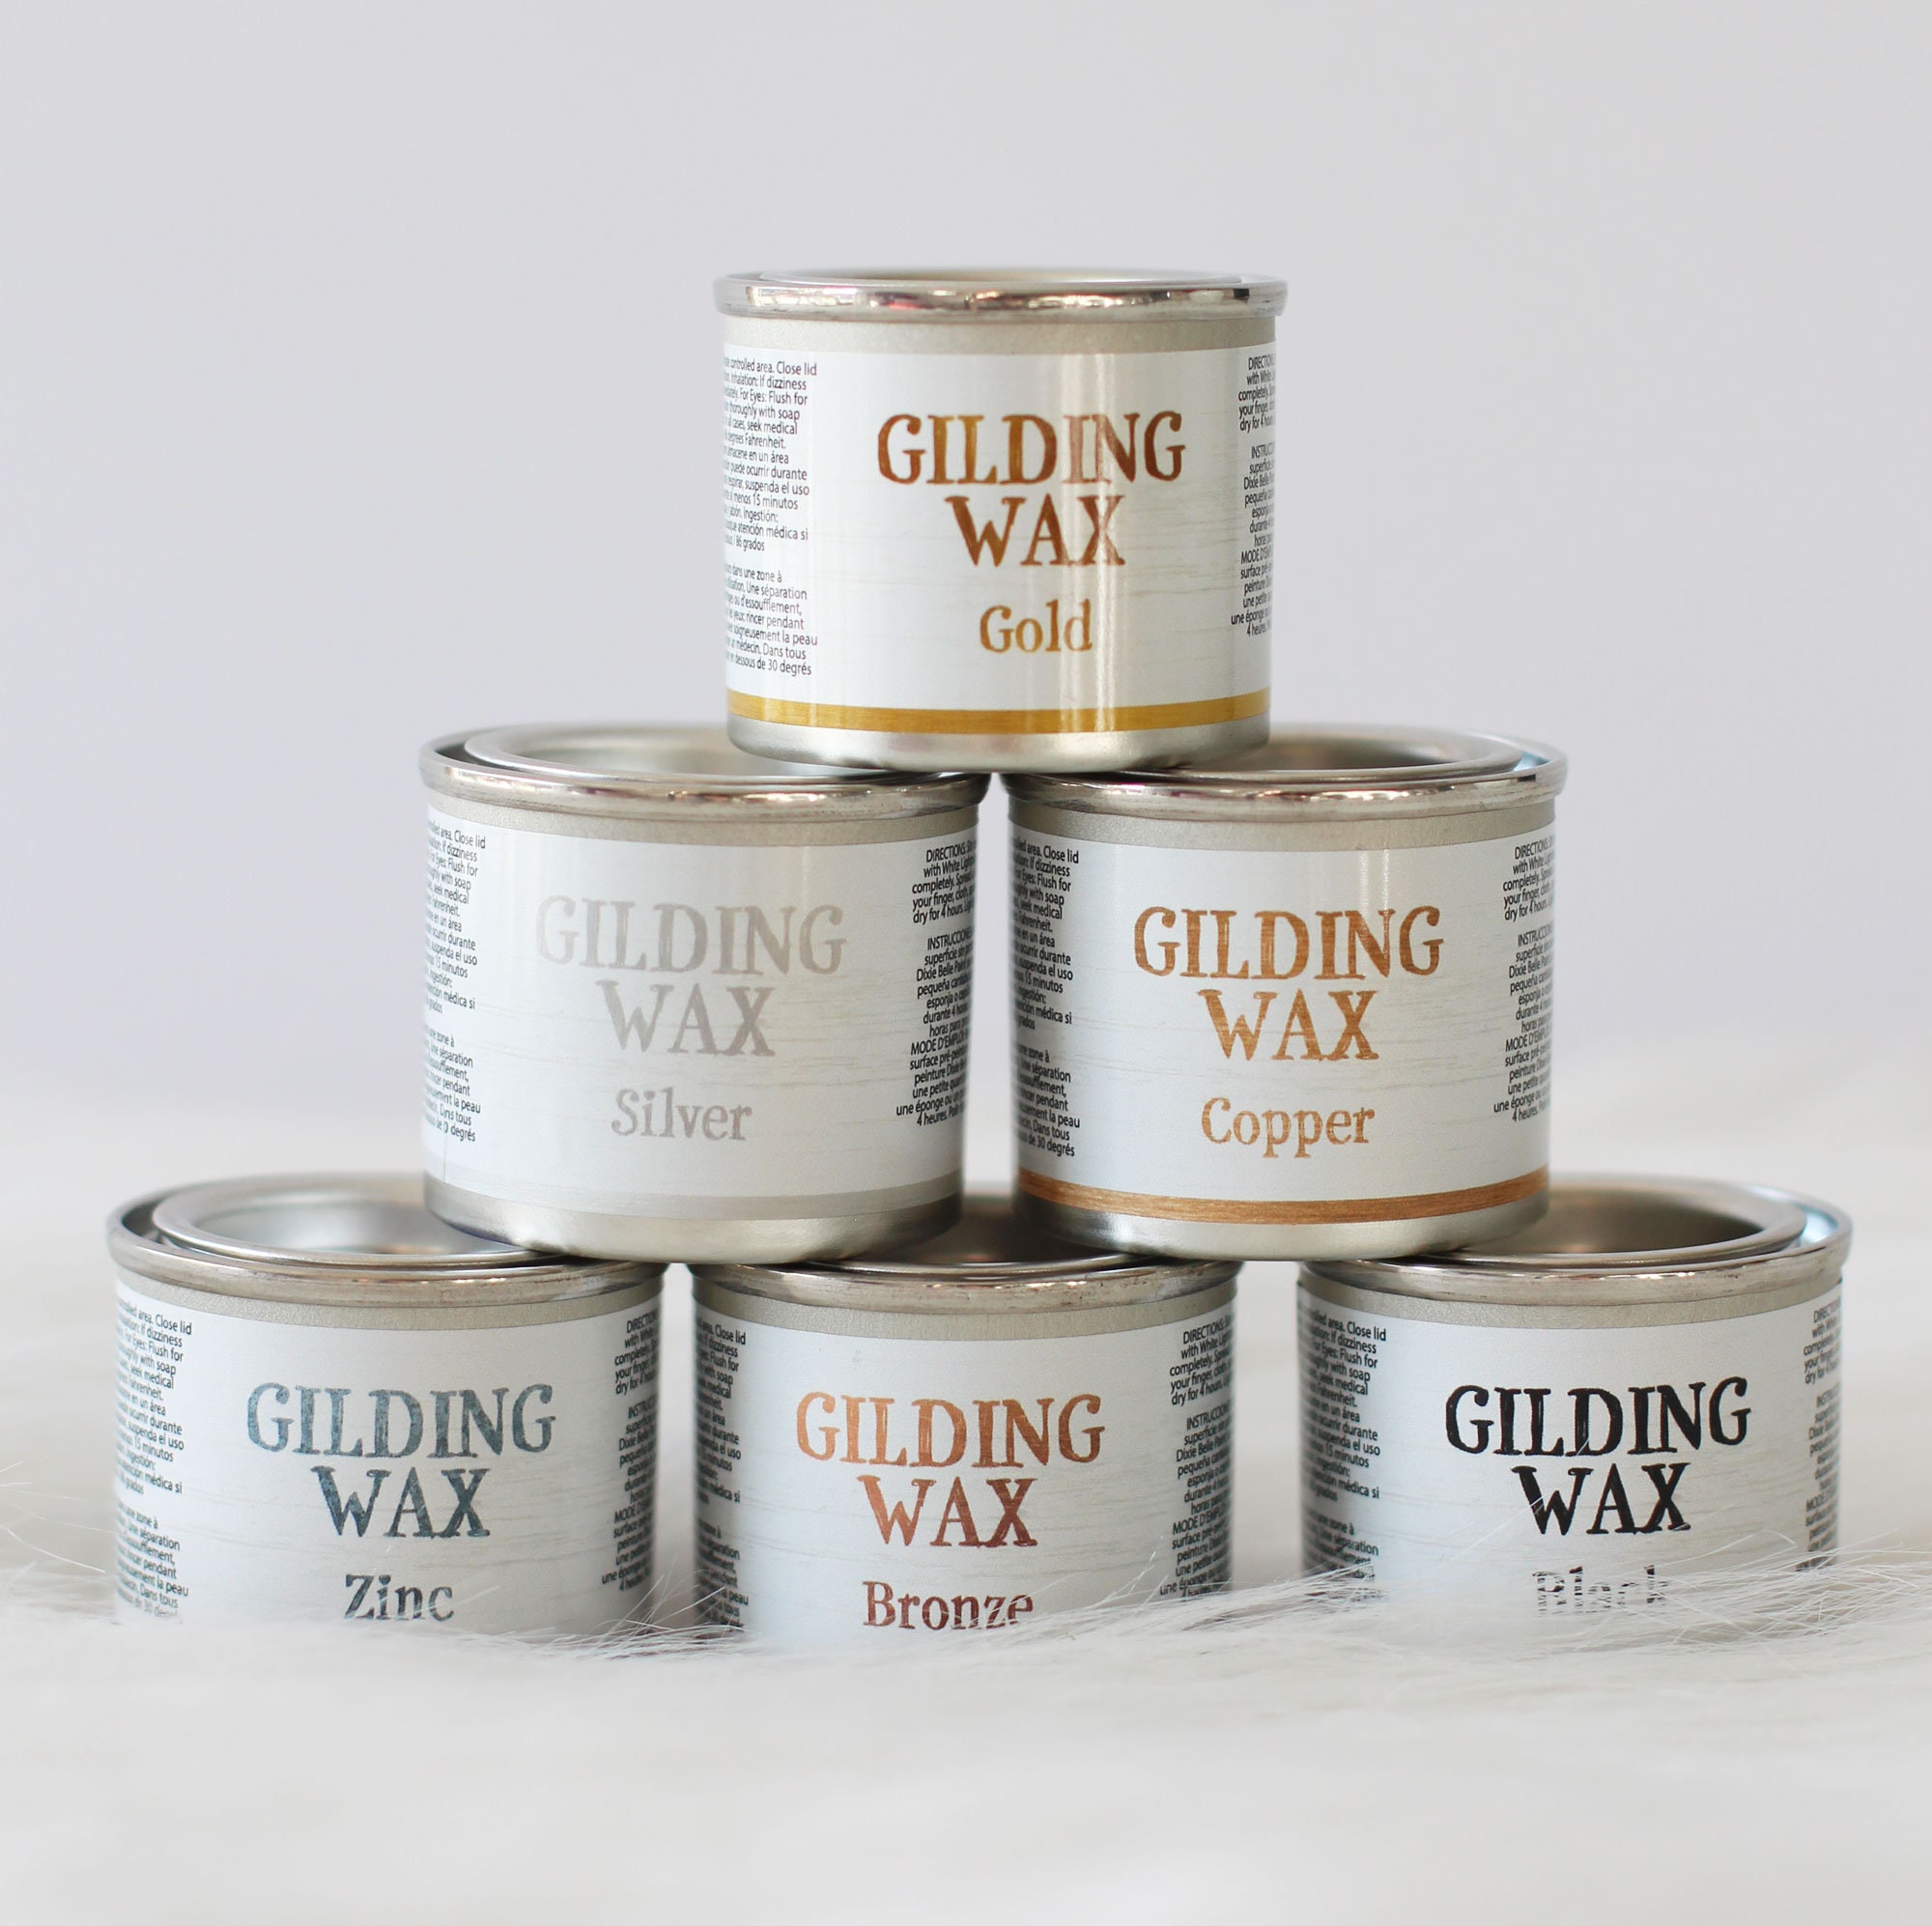 Let's Learn About Dixie Belle's New Gilding Wax!